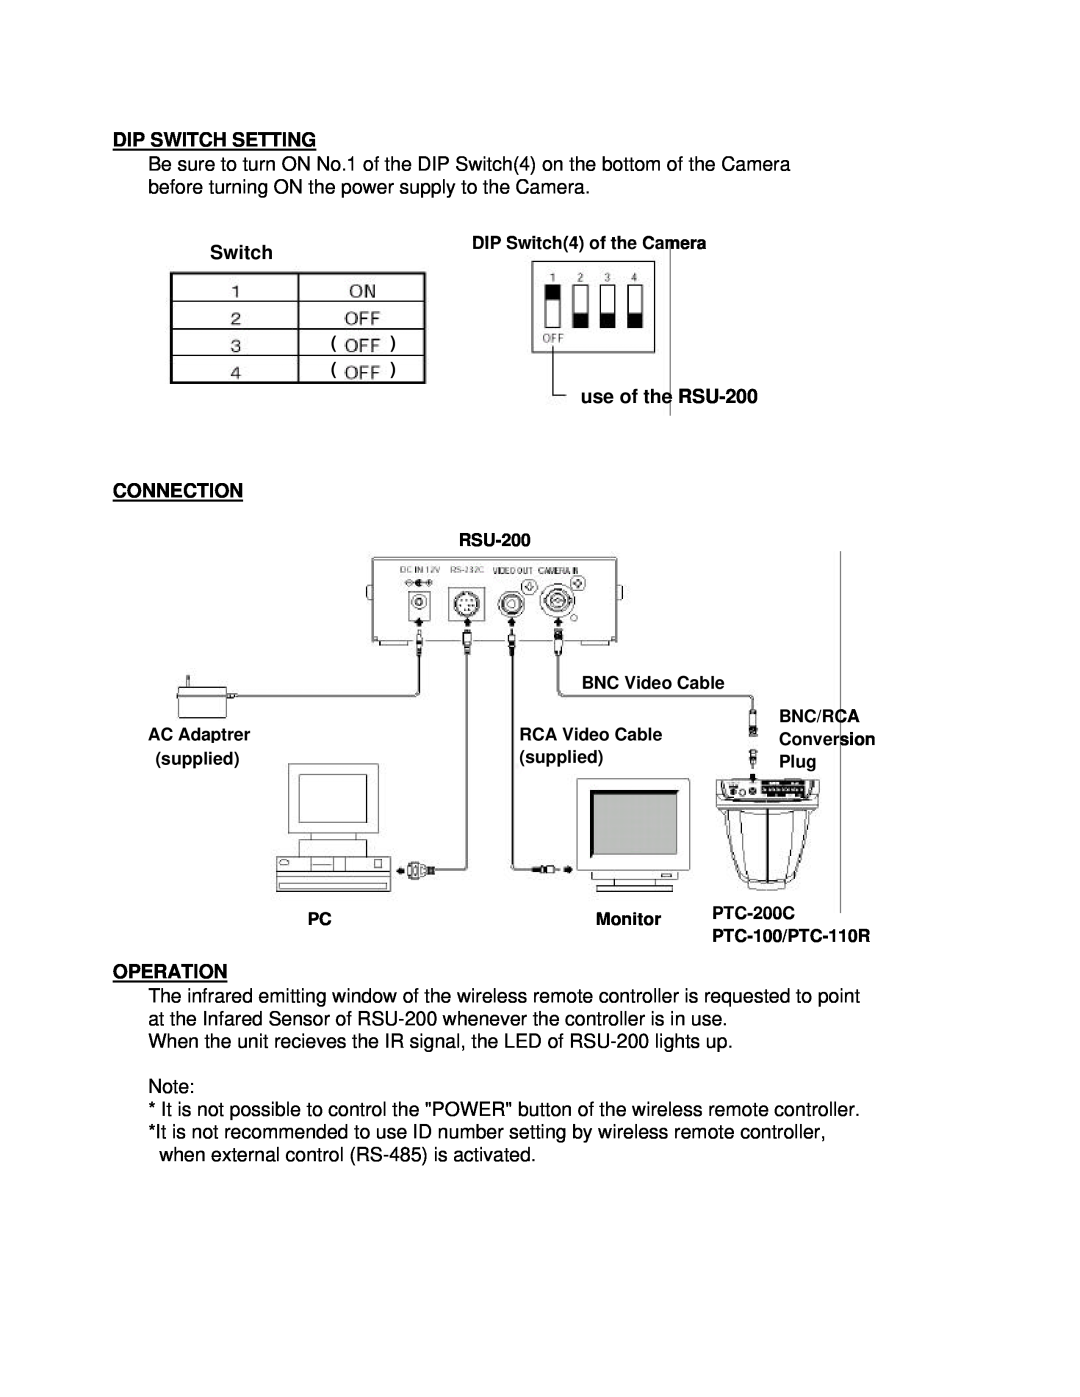 Elmo instruction manual Dip Switch Setting, Connection, use of the RSU-200, Operation 